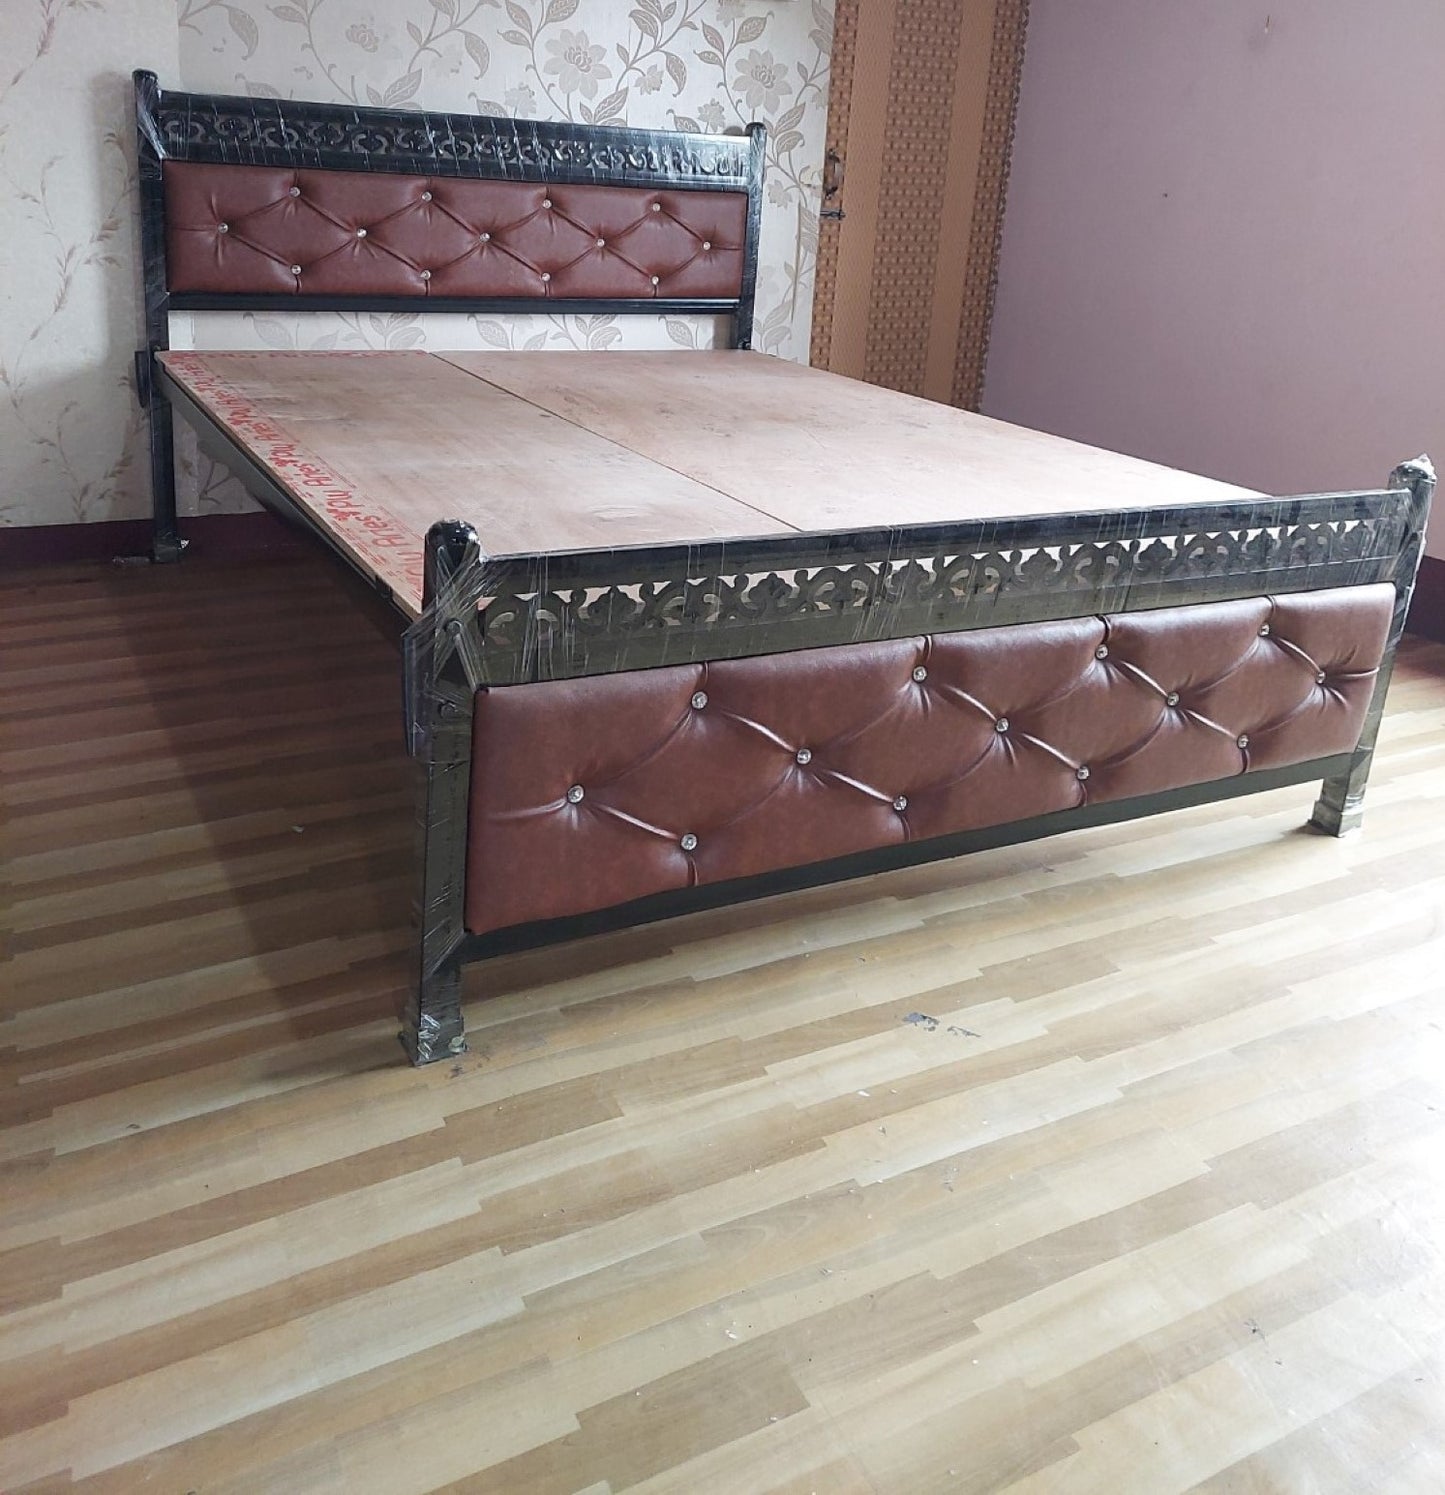 Bowzar King Size 6X6.5 Feet Metal Bed With Designed Cushion Brown